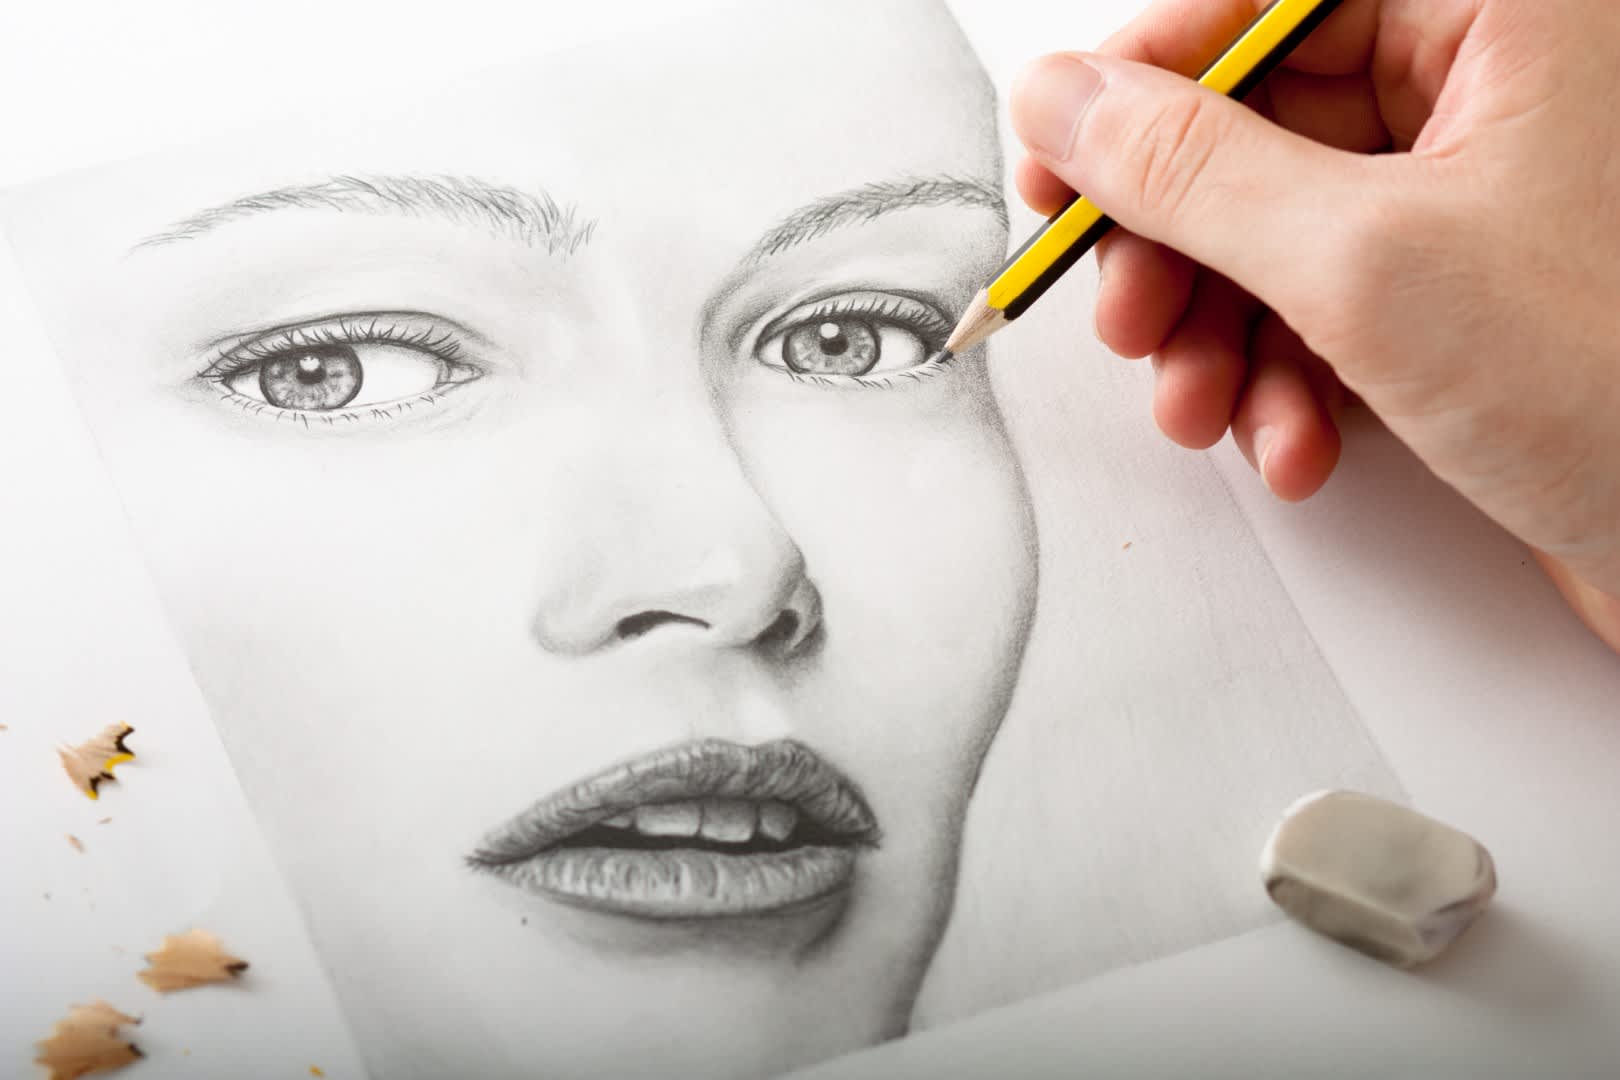 How To Draw A Realistic Face Using Pencil For Beginners | Udemy